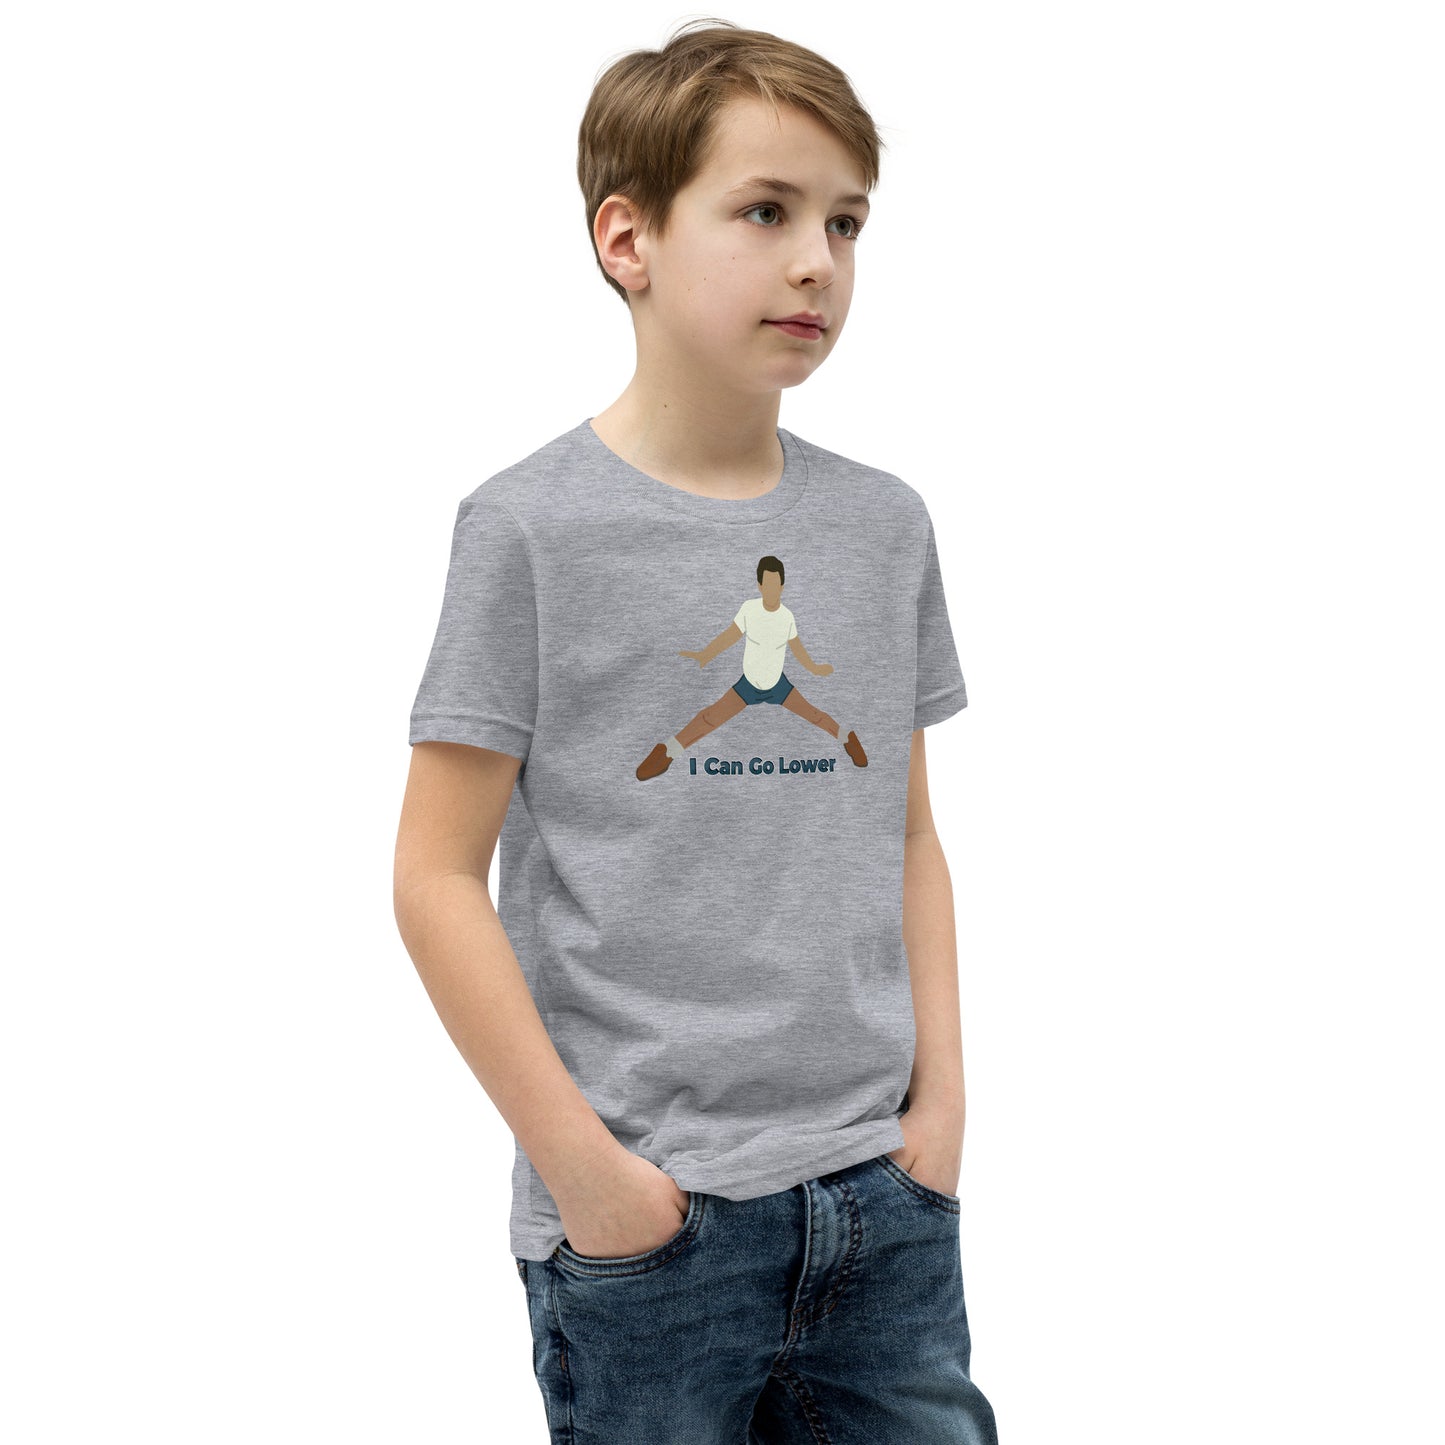 I Can Go Lower - Youth Short Sleeve T-Shirt